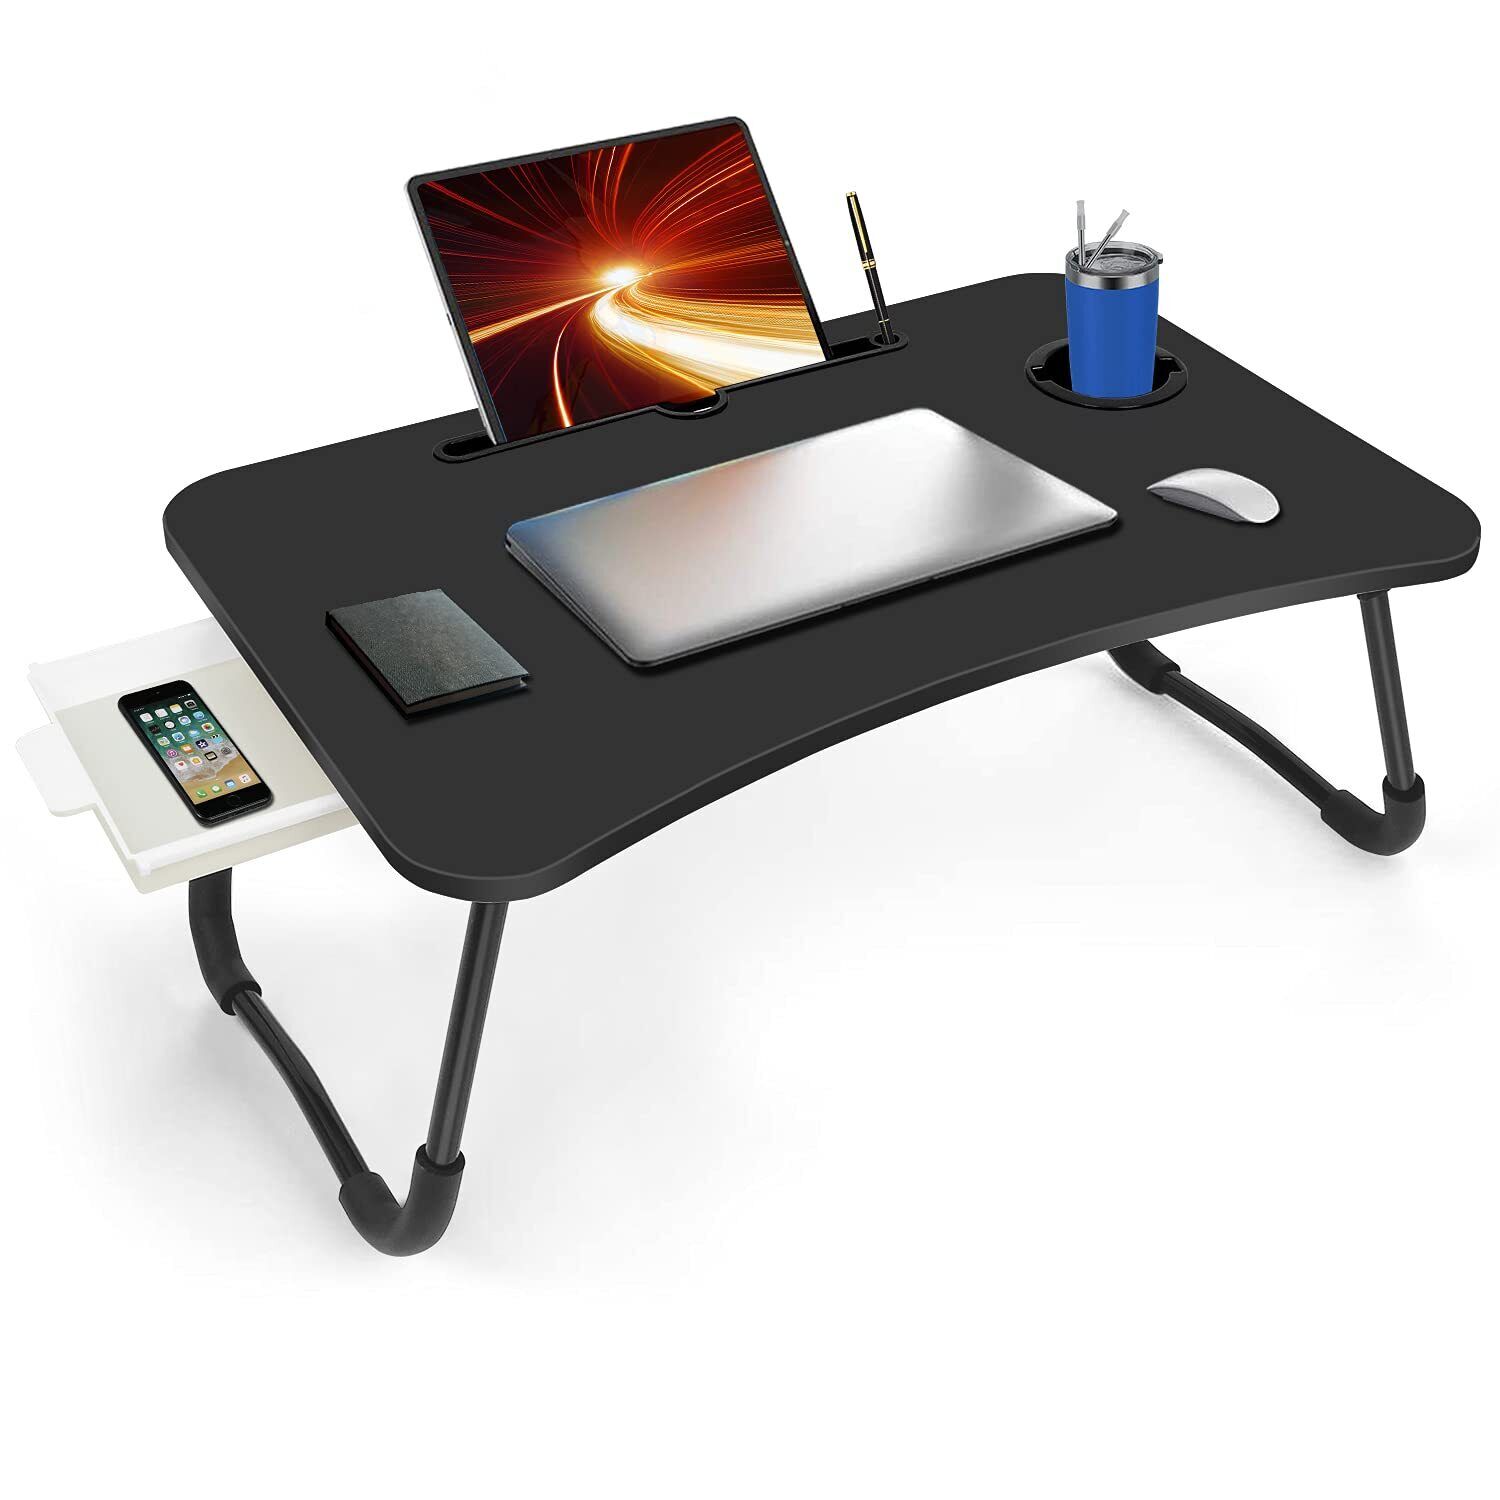 Fayquaze Laptop Bed Table, Portable Foldable Laptop Bed Desk